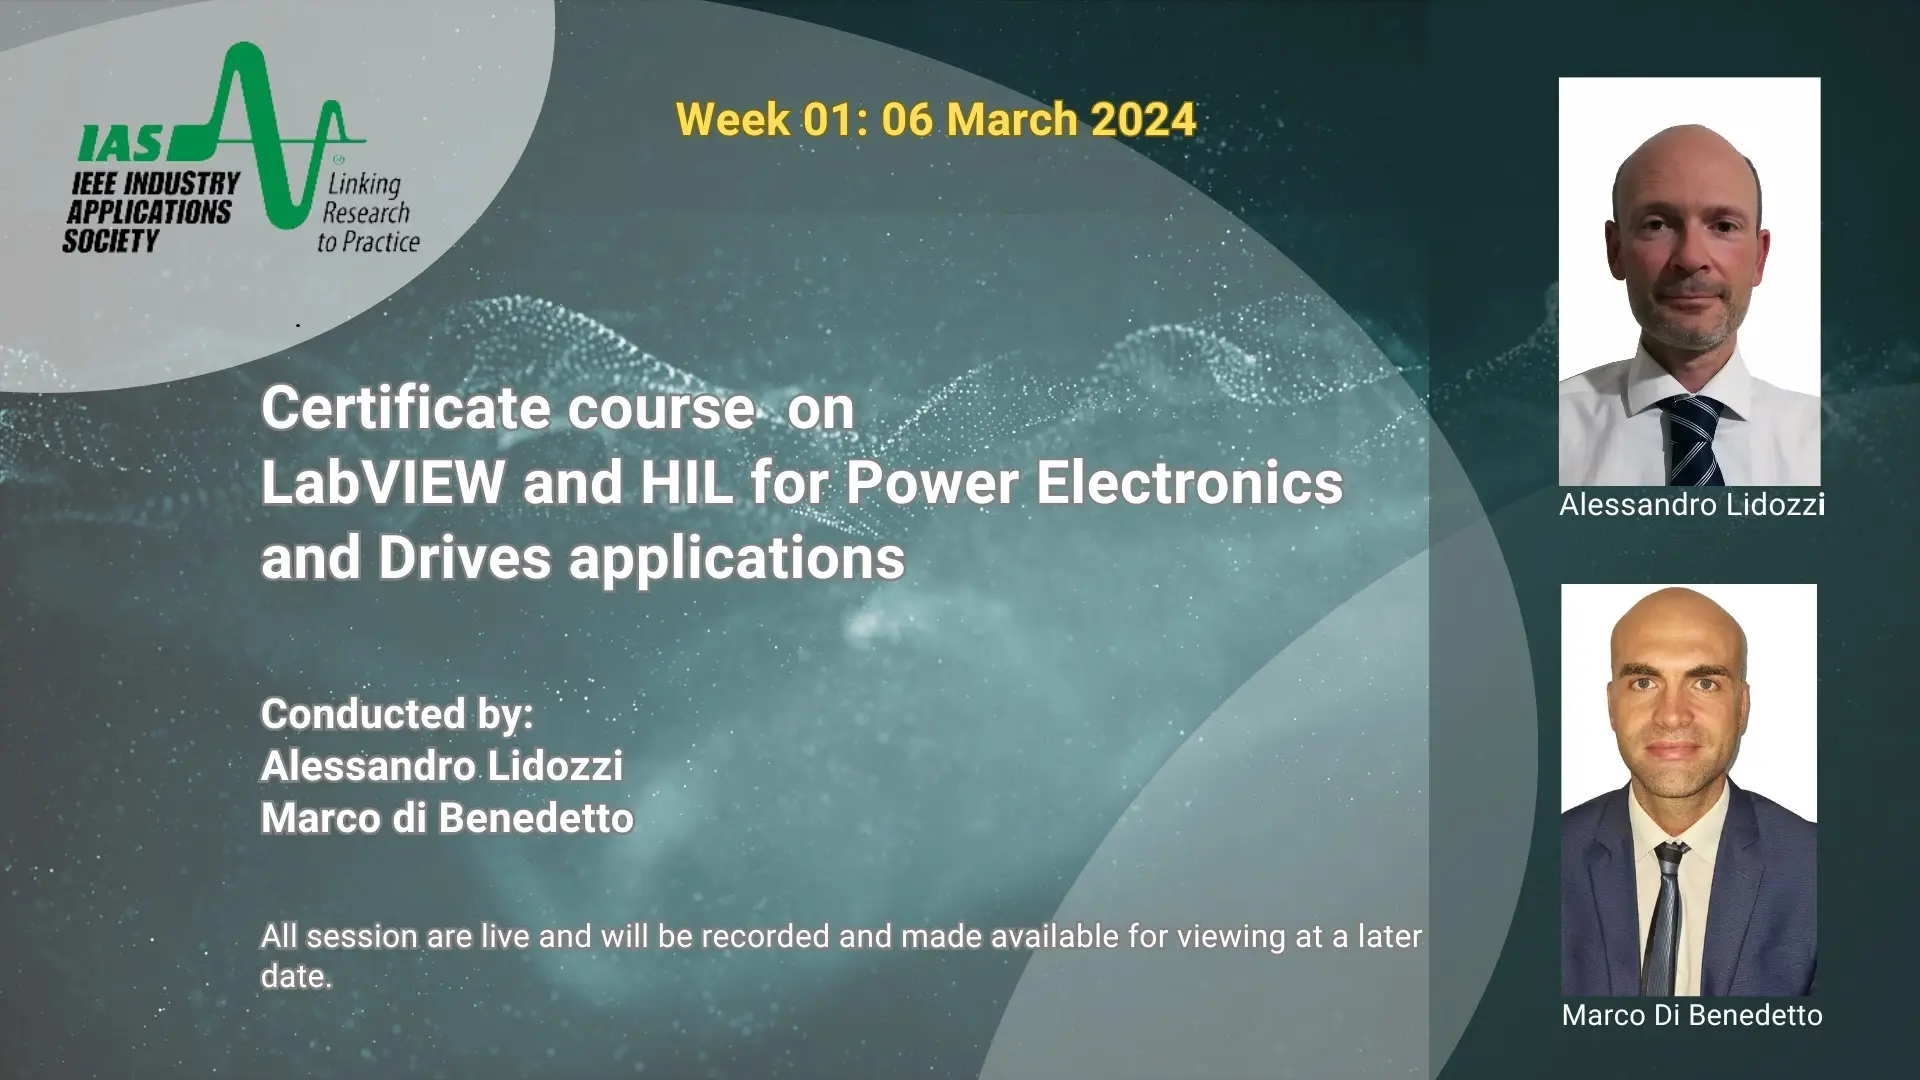 Week 01: Certificate Course on LabVIEW and HIL for Power Electronics and Drives Applications